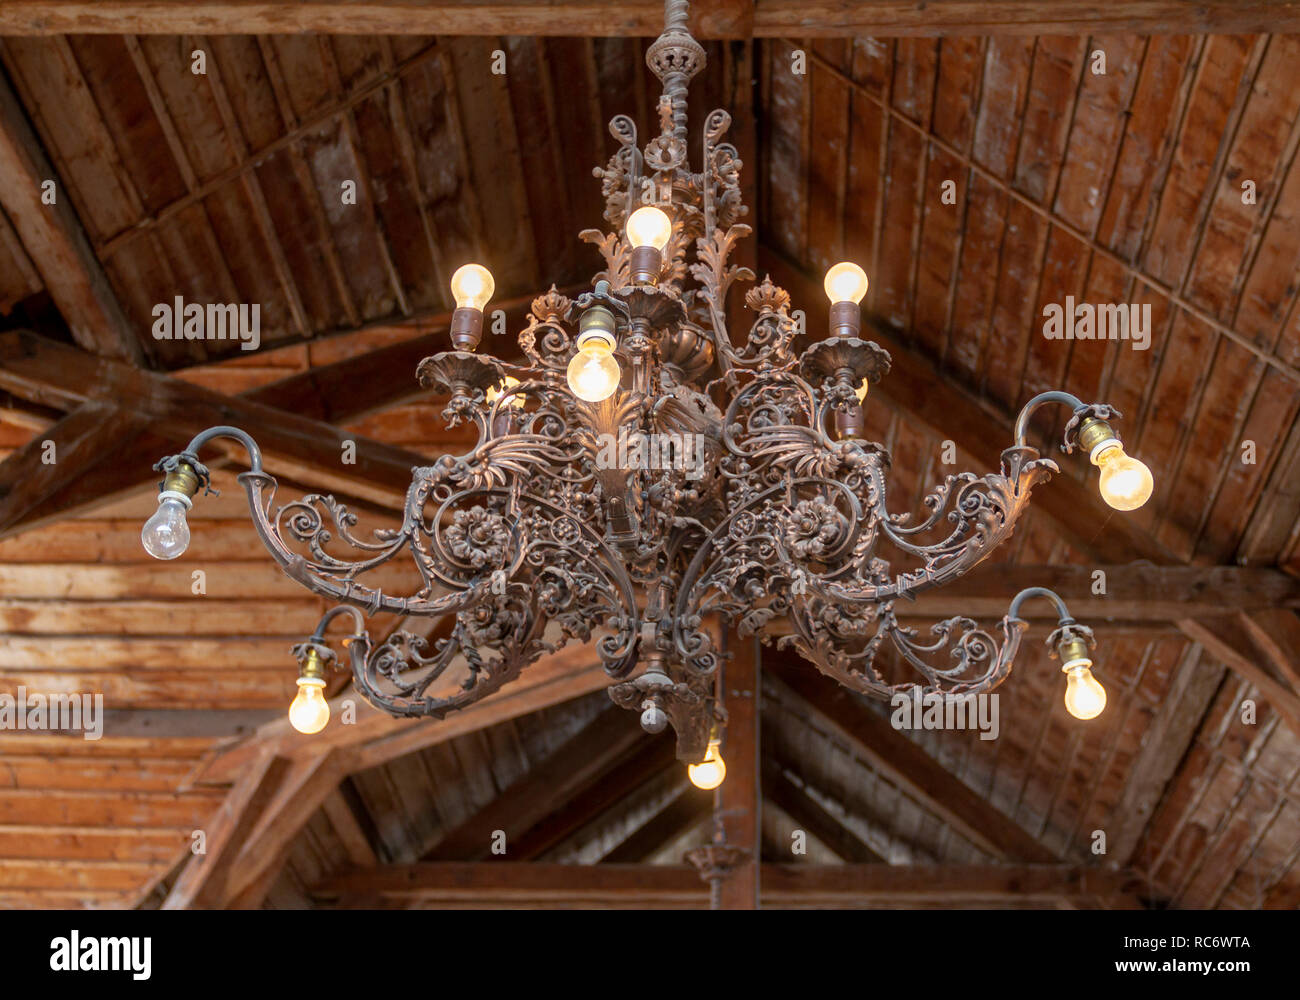 historic chandelier in rural wooden ambiance Stock Photo